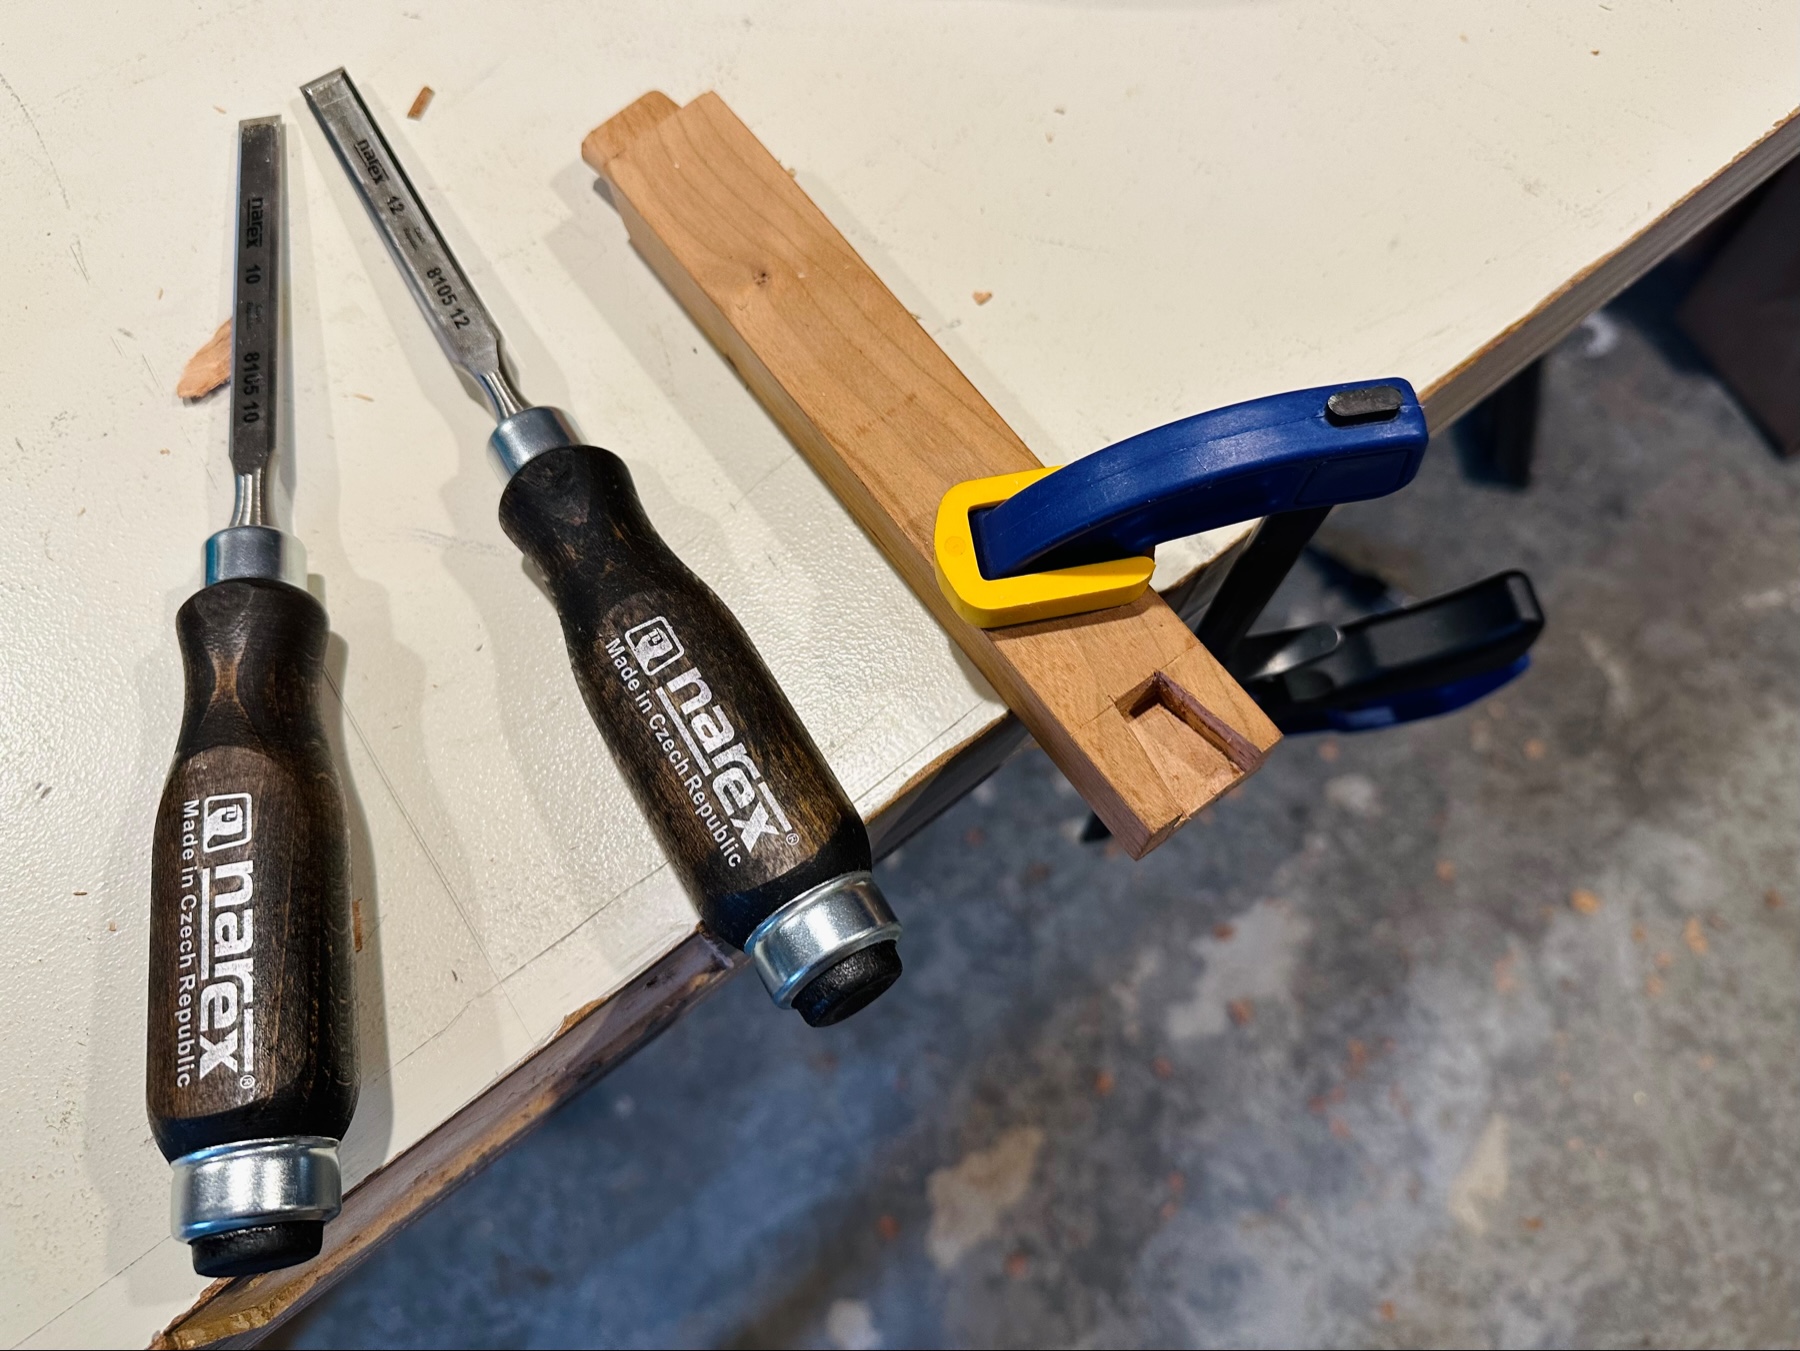 A clamped piece of wood with a partial dovetail joint and two Narex chisels next to it.